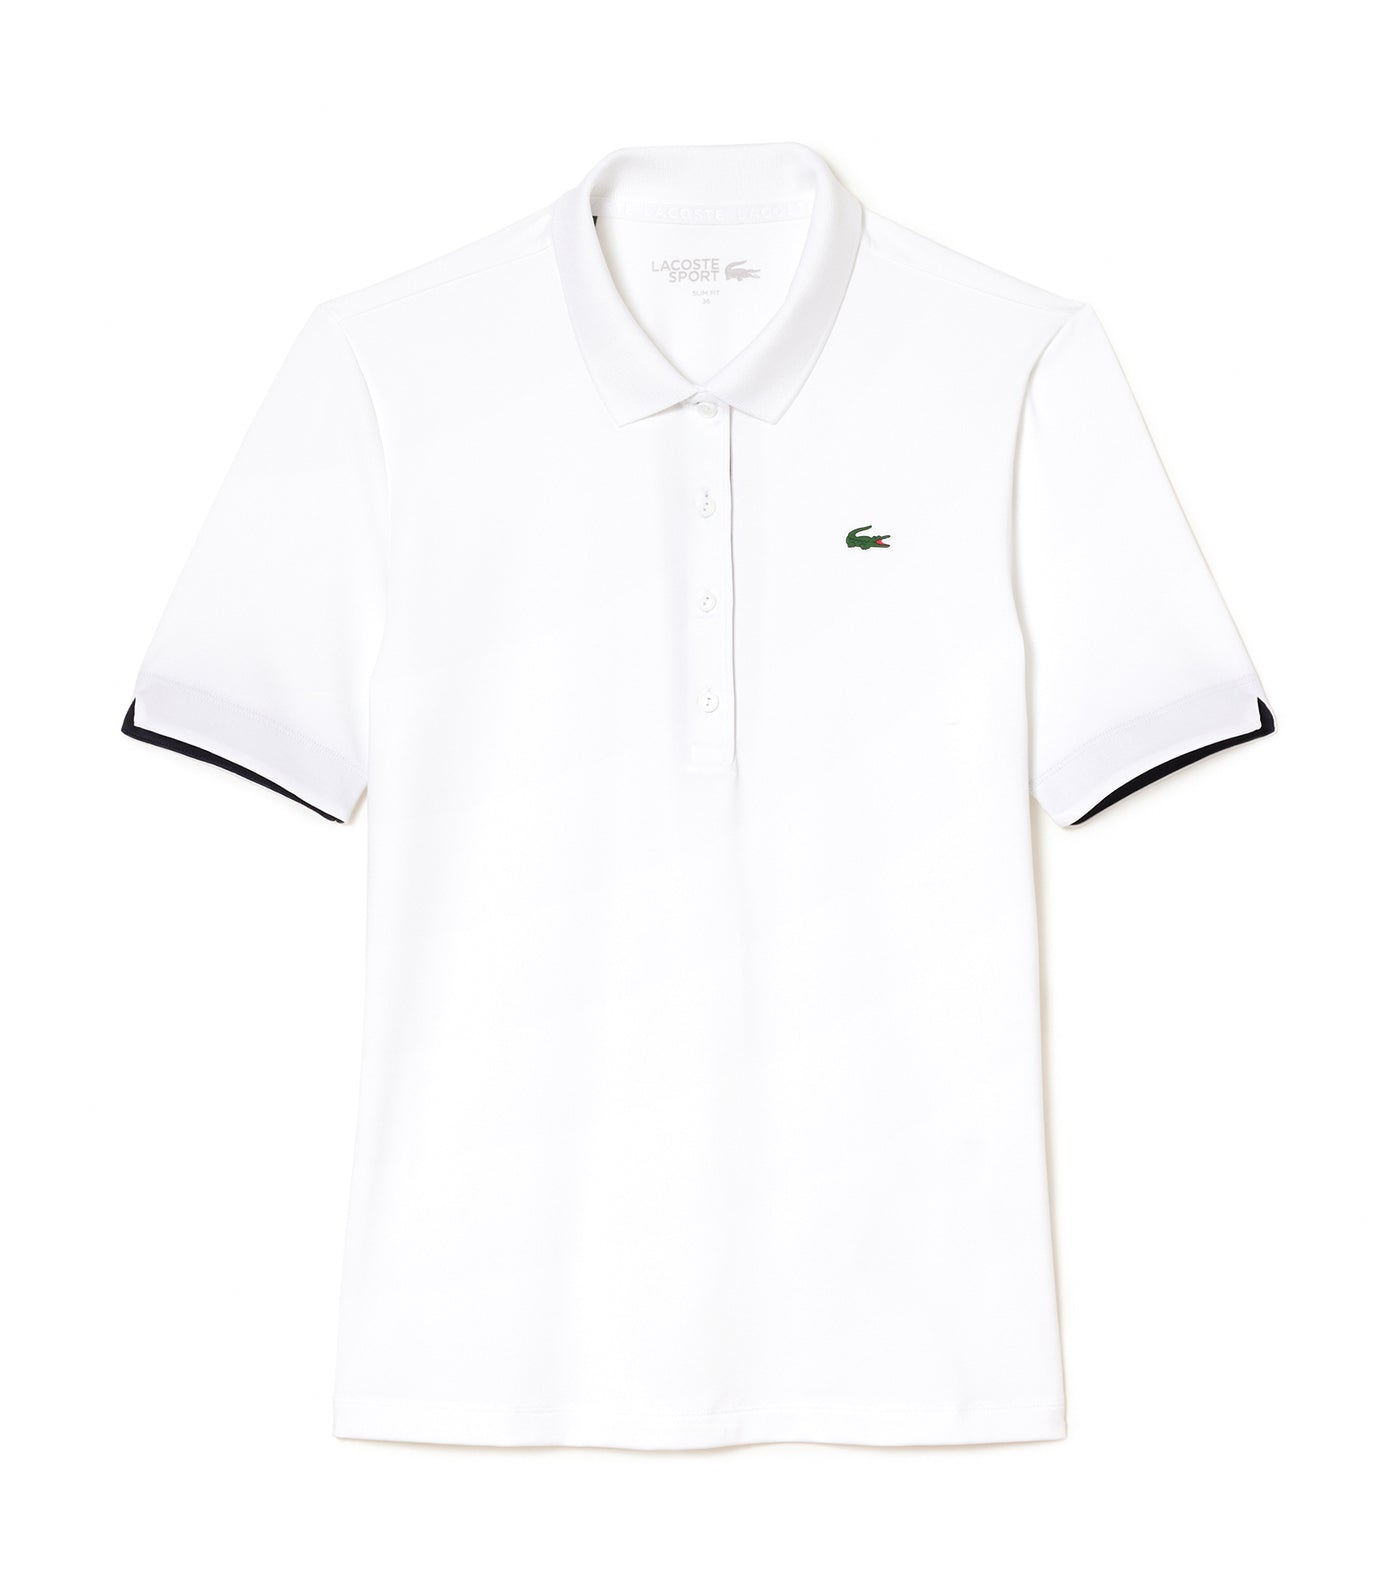 Women's Lacoste SPORT Breathable Stretch Golf Polo Shirt White/Navy Blue